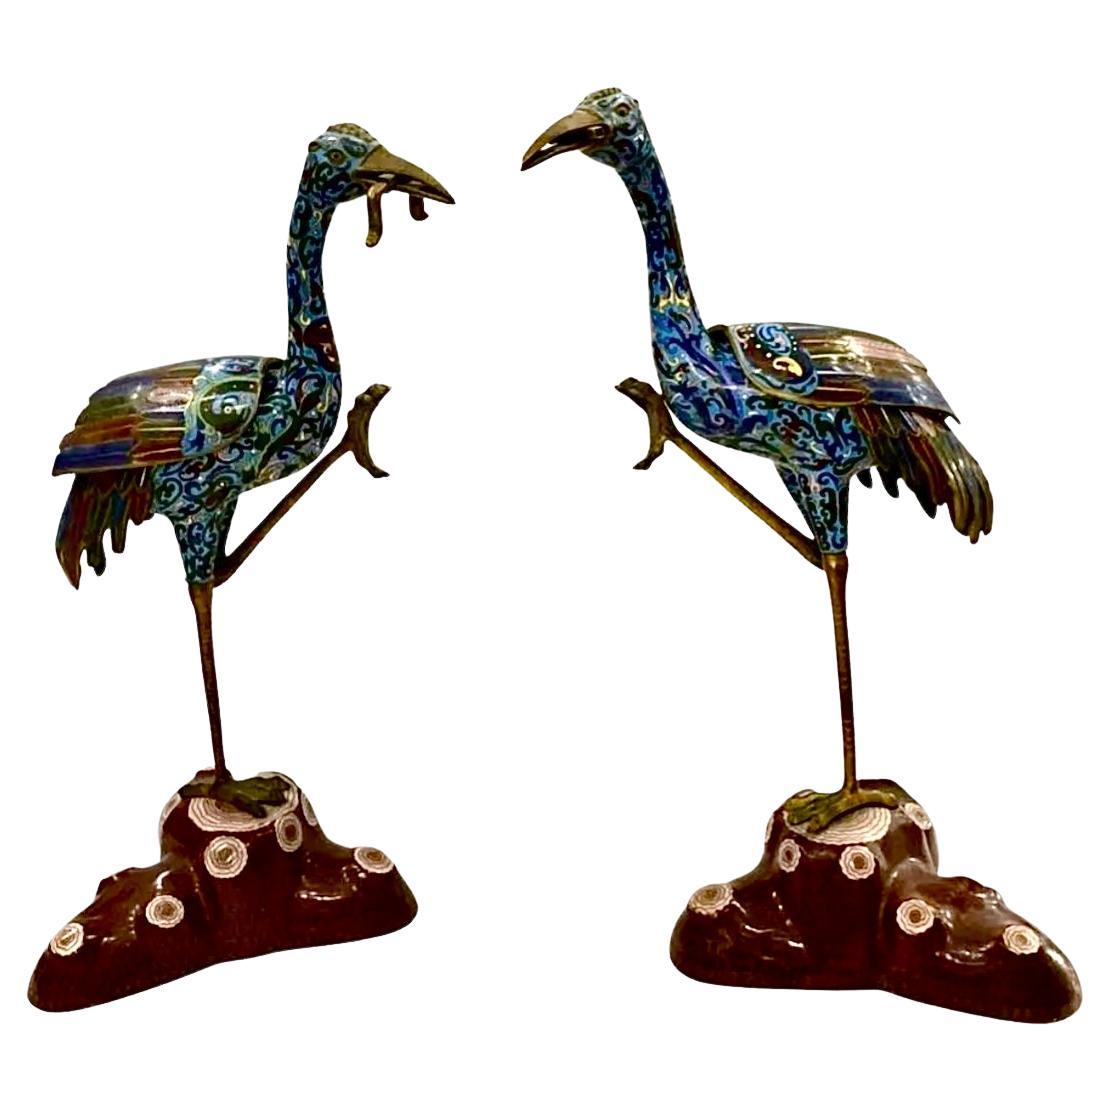 Chinese Export Pair of Chinese Cloisonne Enamel Cranes